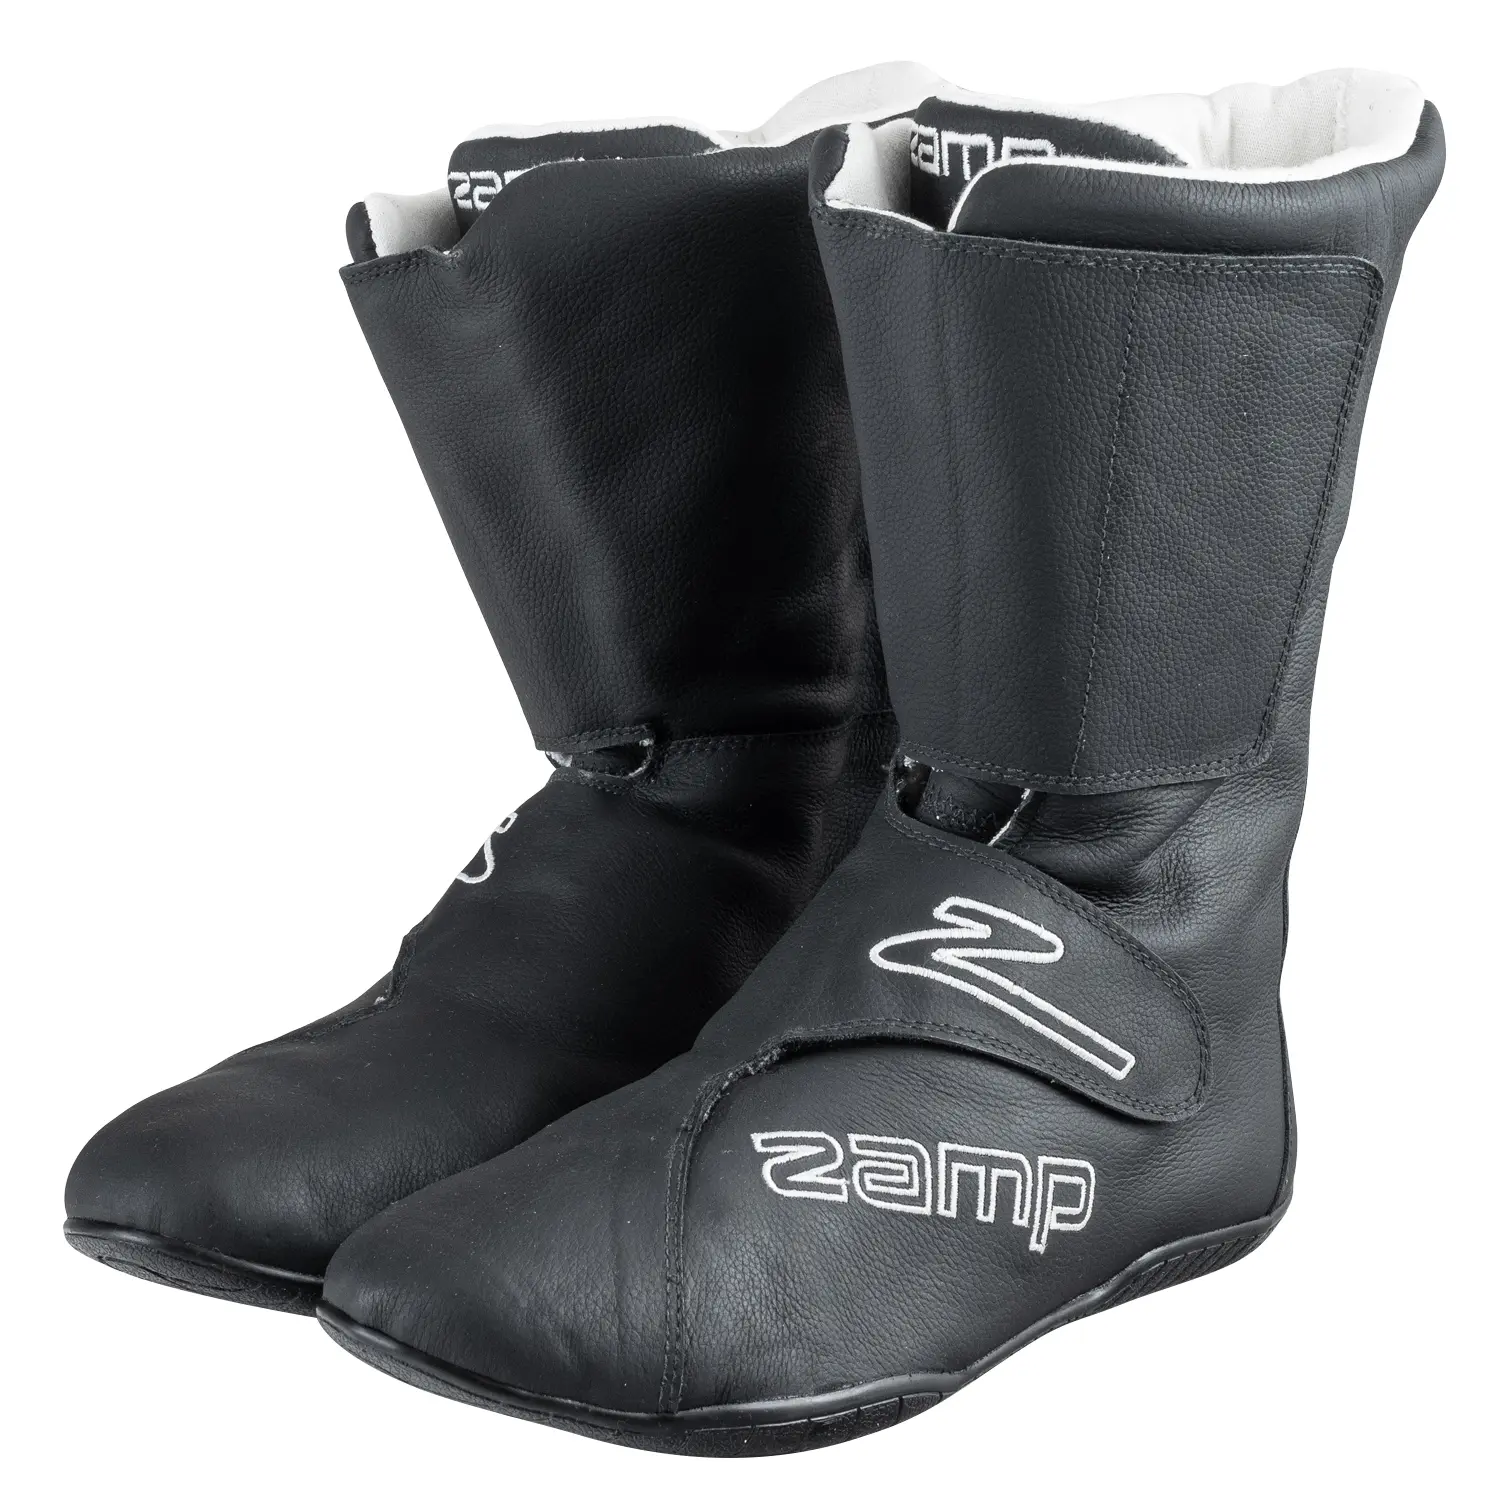 ZR-Drag Racing Shoes